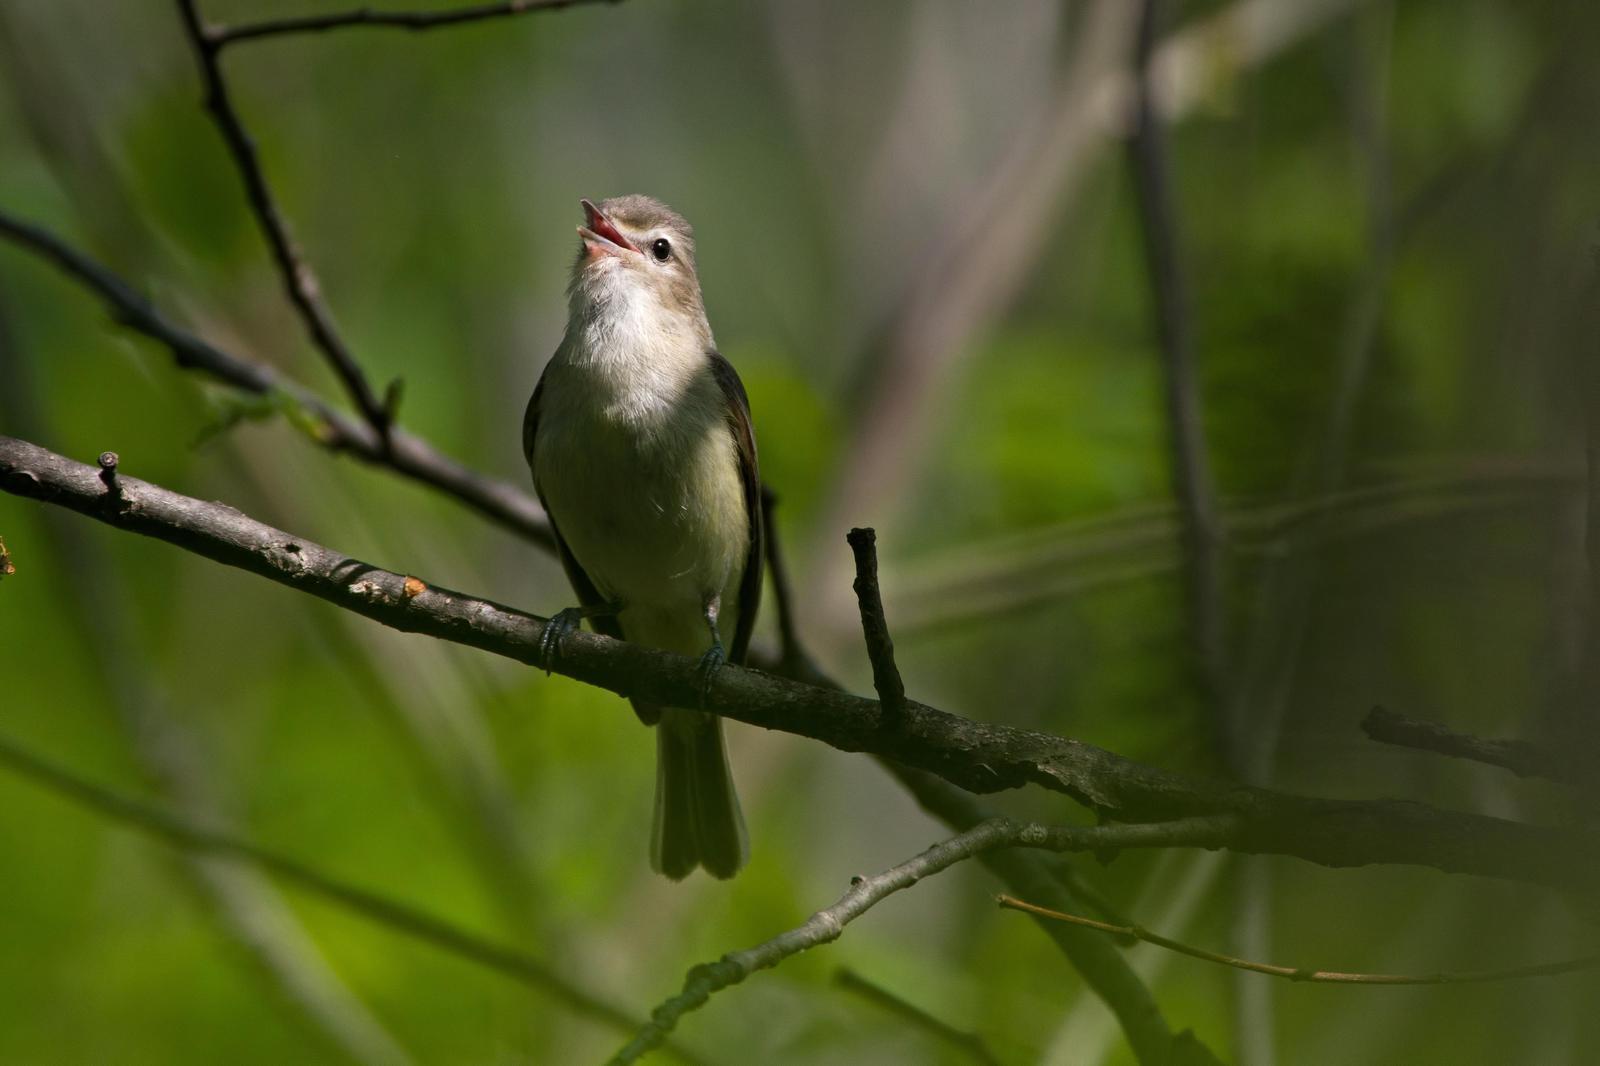 Warbling Vireo Photo by Rob Dickerson